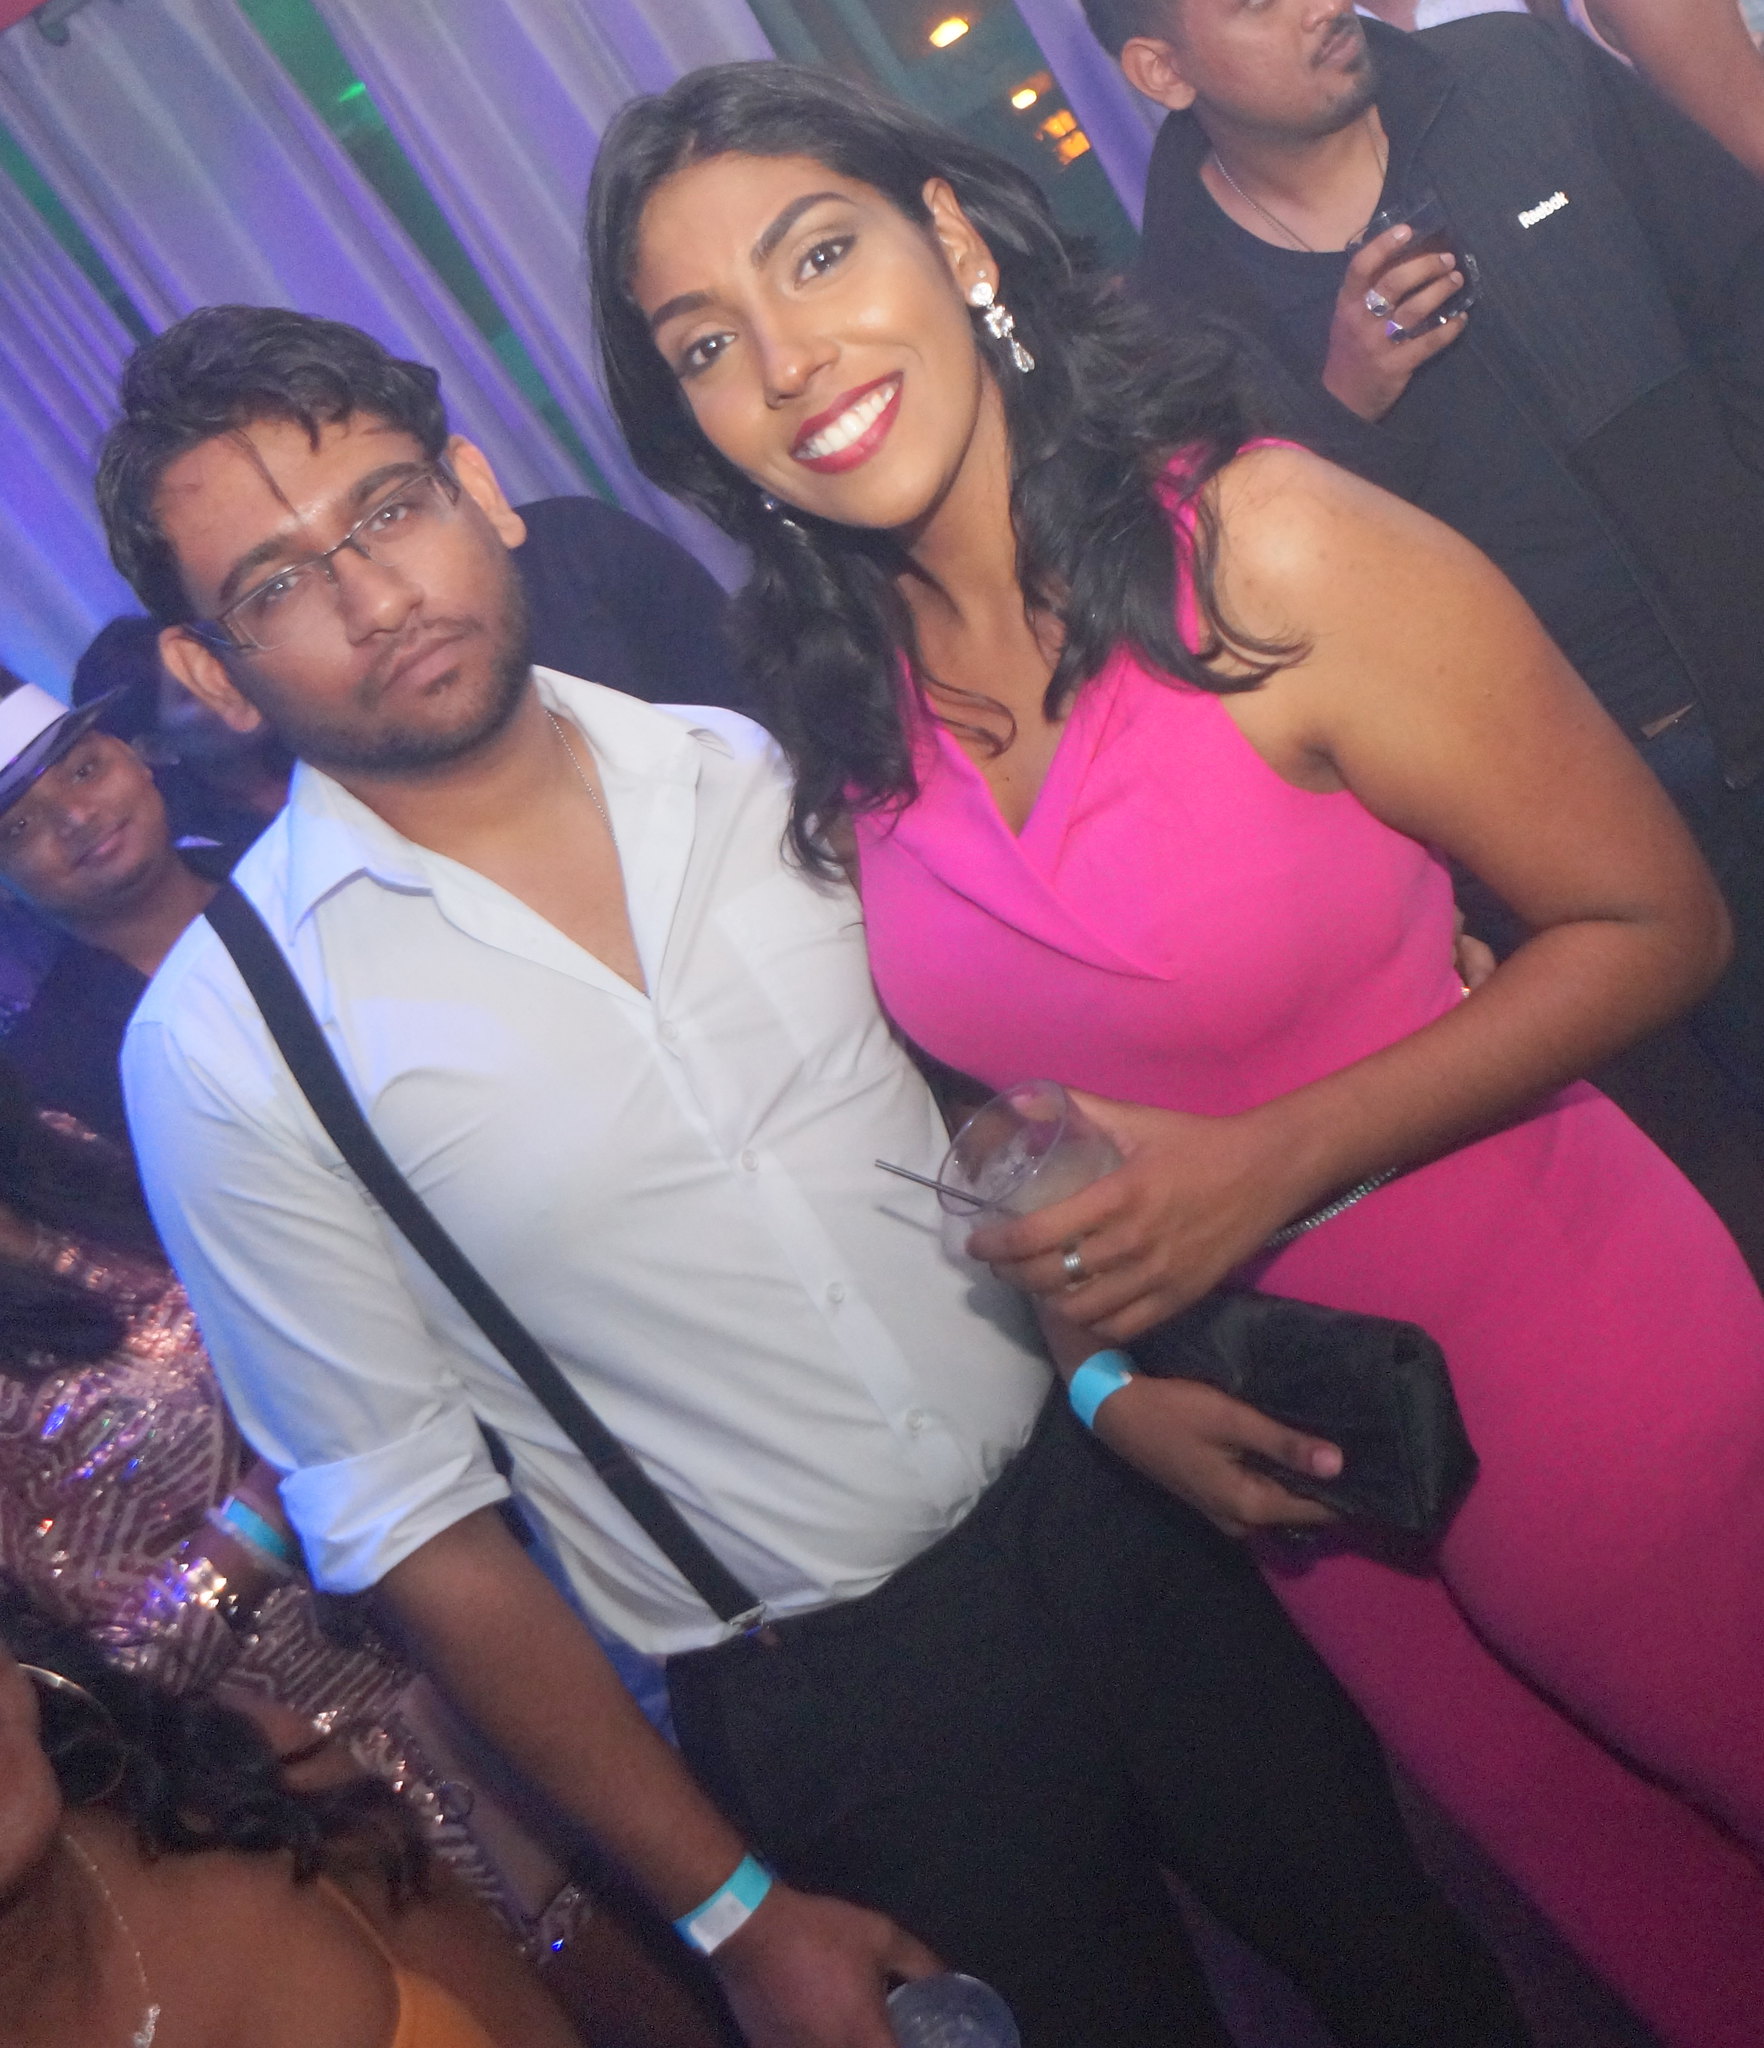 UWI Law Society Cocktail Party 2018